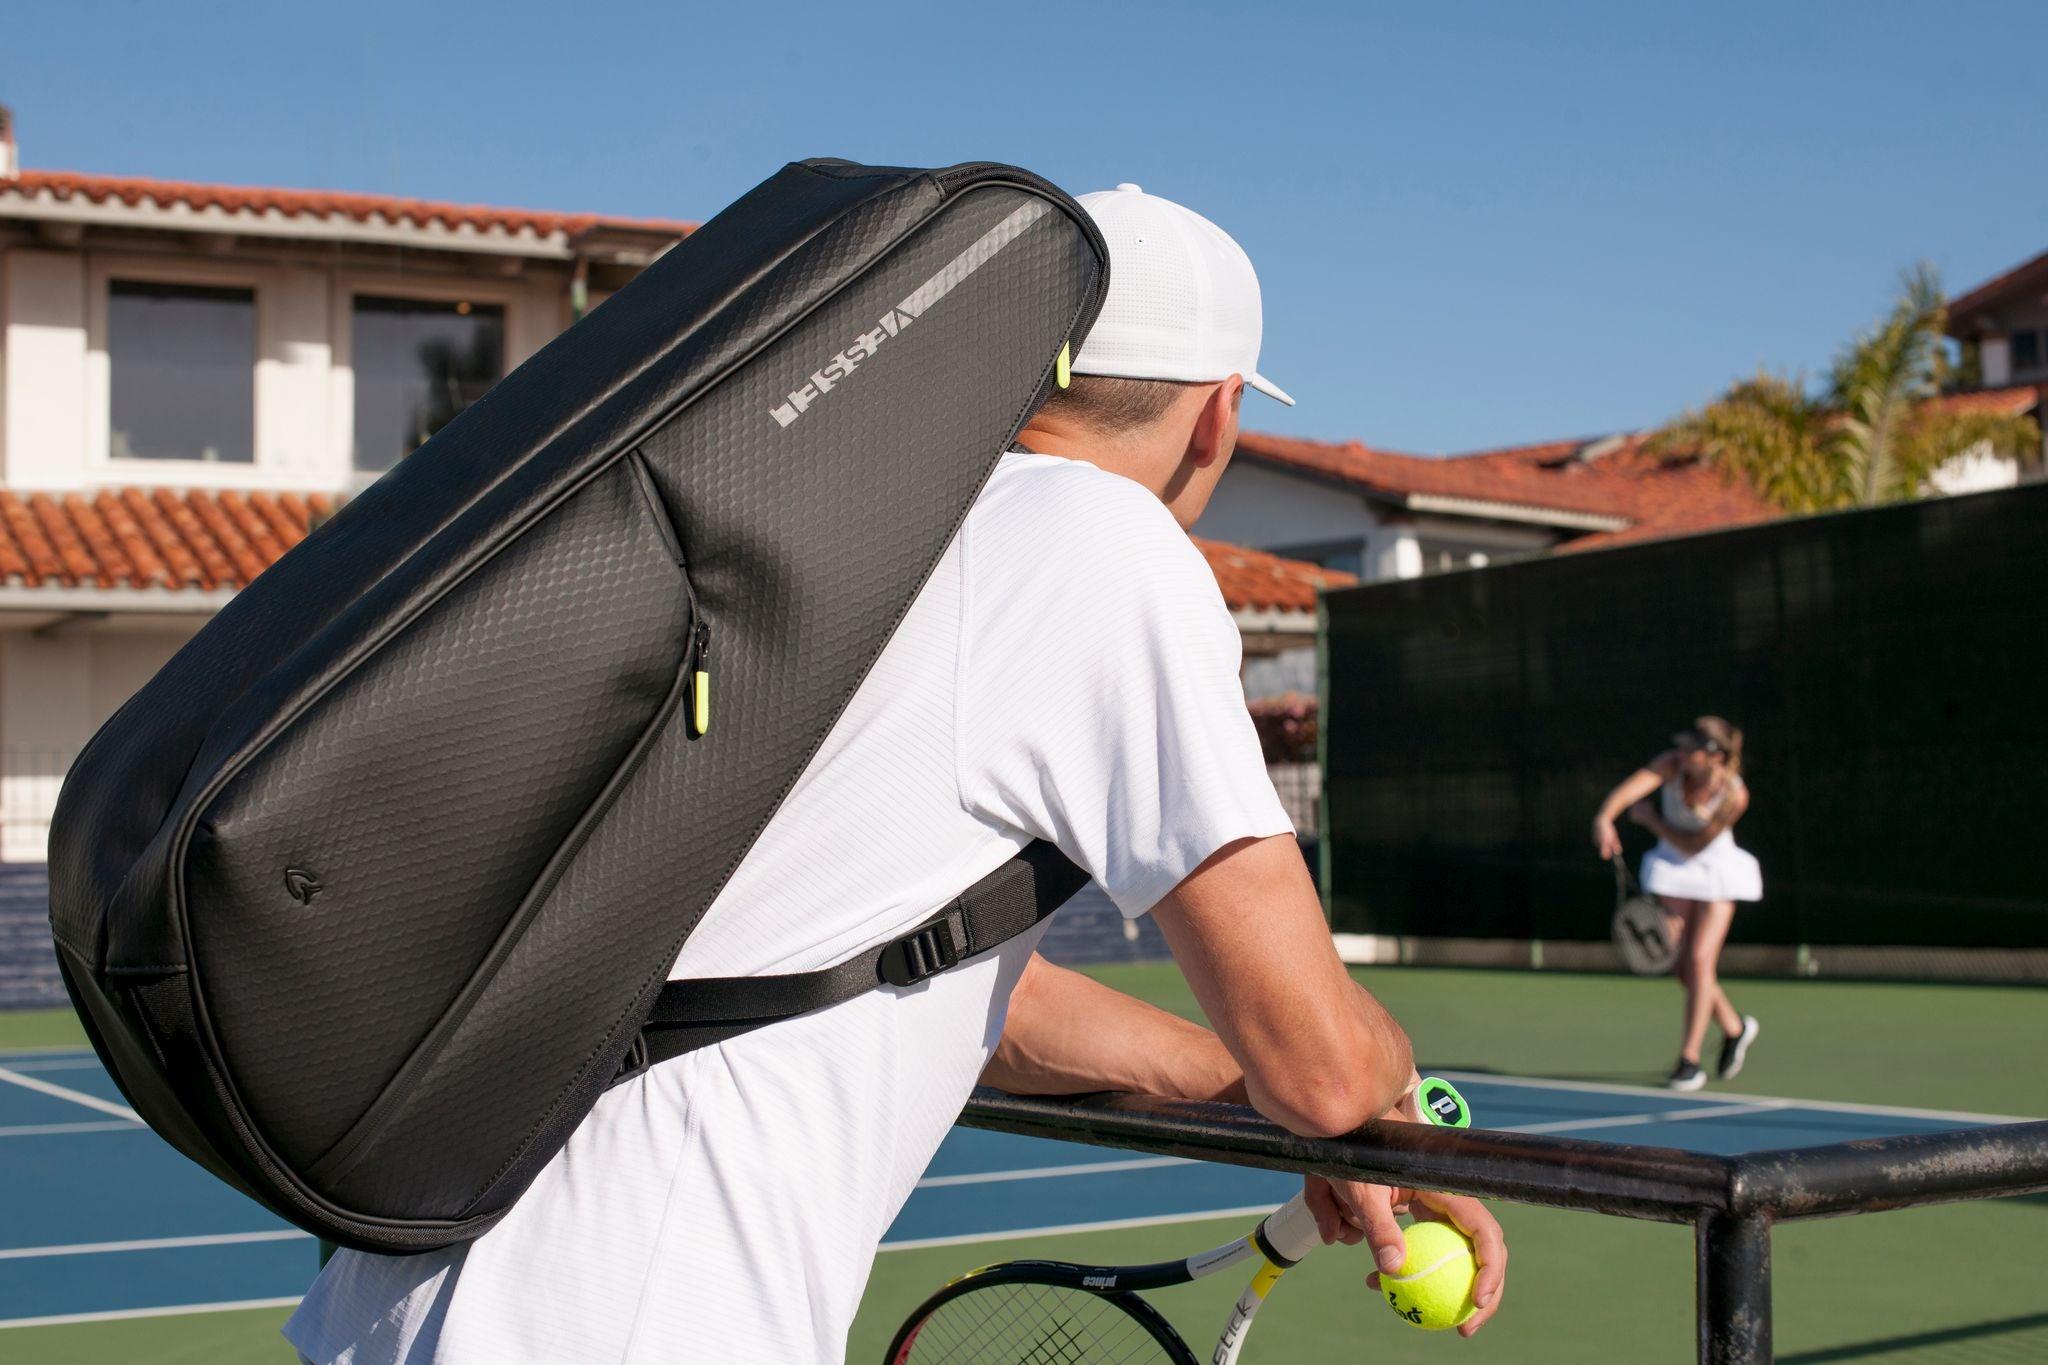 Best Gifts for Tennis Players